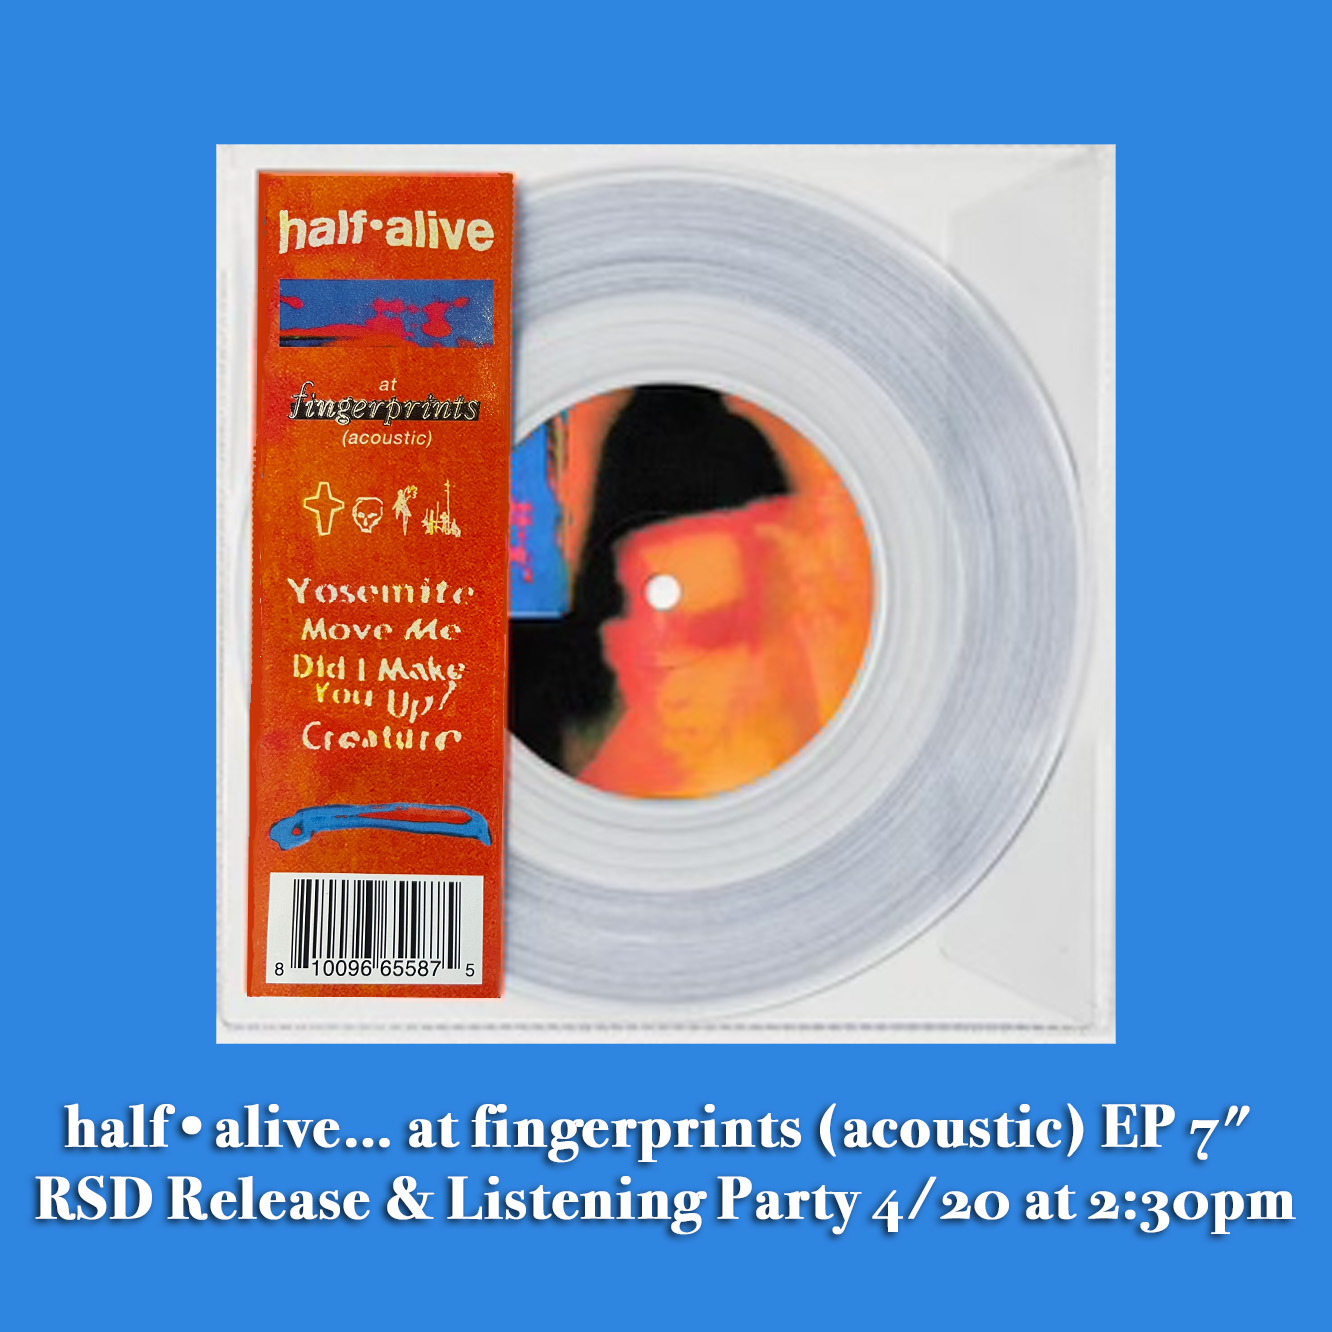 half•alive… at fingerprints (acoustic) EP 7" RSD Release and Listening Party 4/20 at 2:30pm